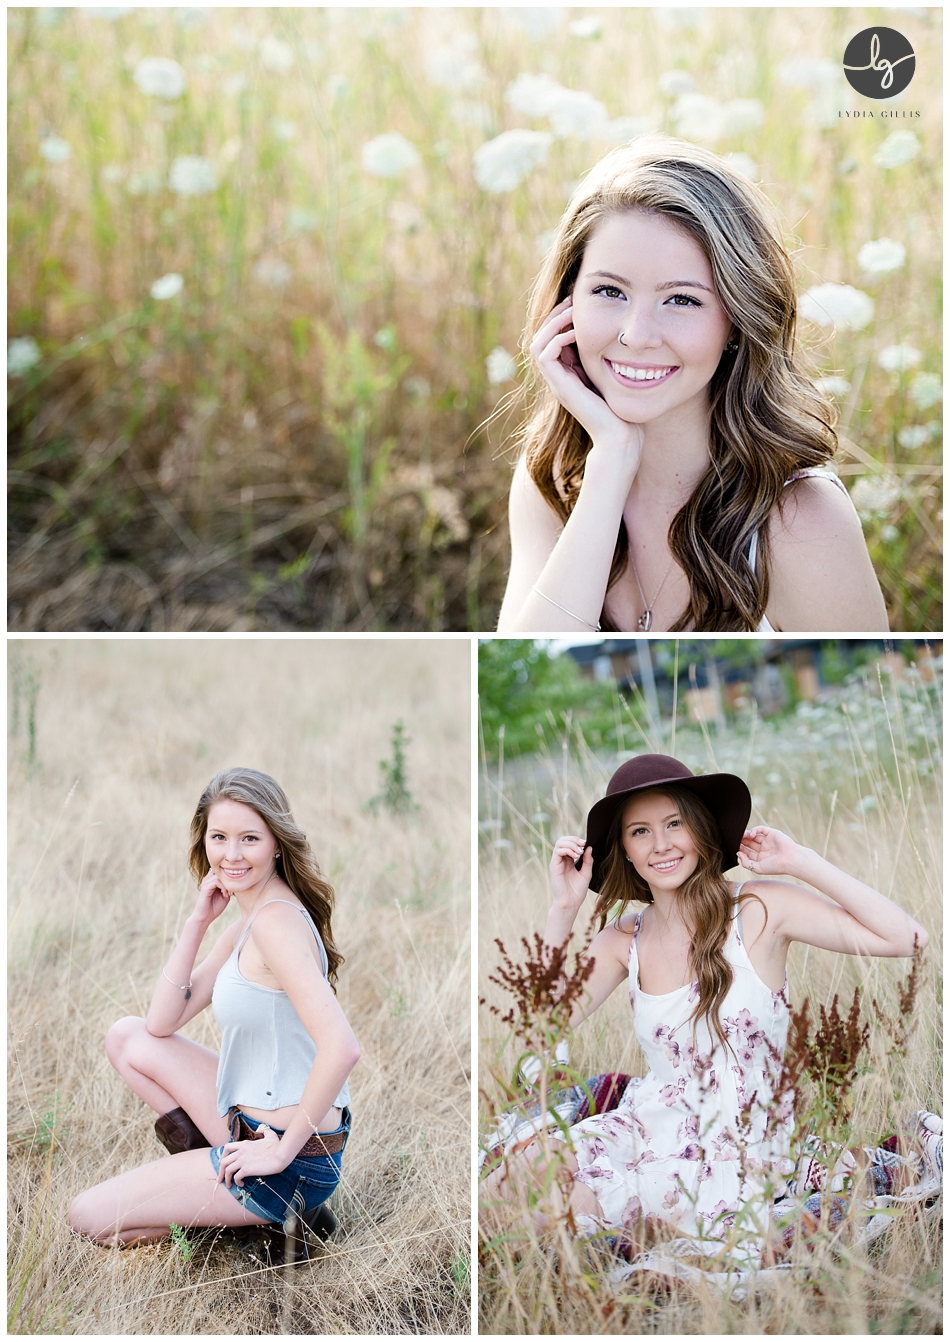 beautiful senior pictures in an outdoor field